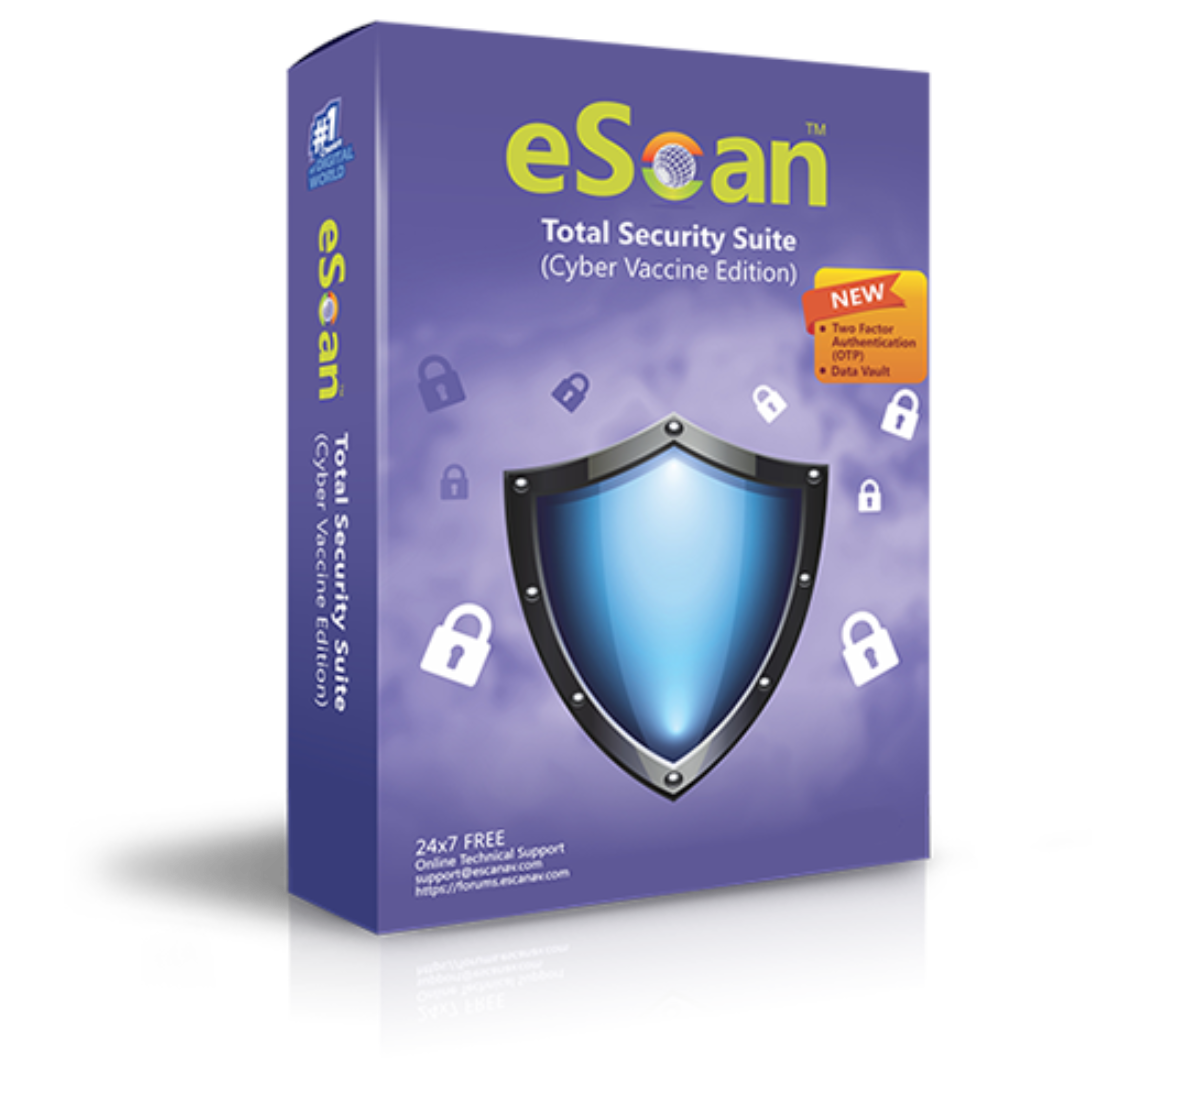 ESCAN INTERNET SECURITY SUITE Photos, Images and Wallpapers - MouthShut.com